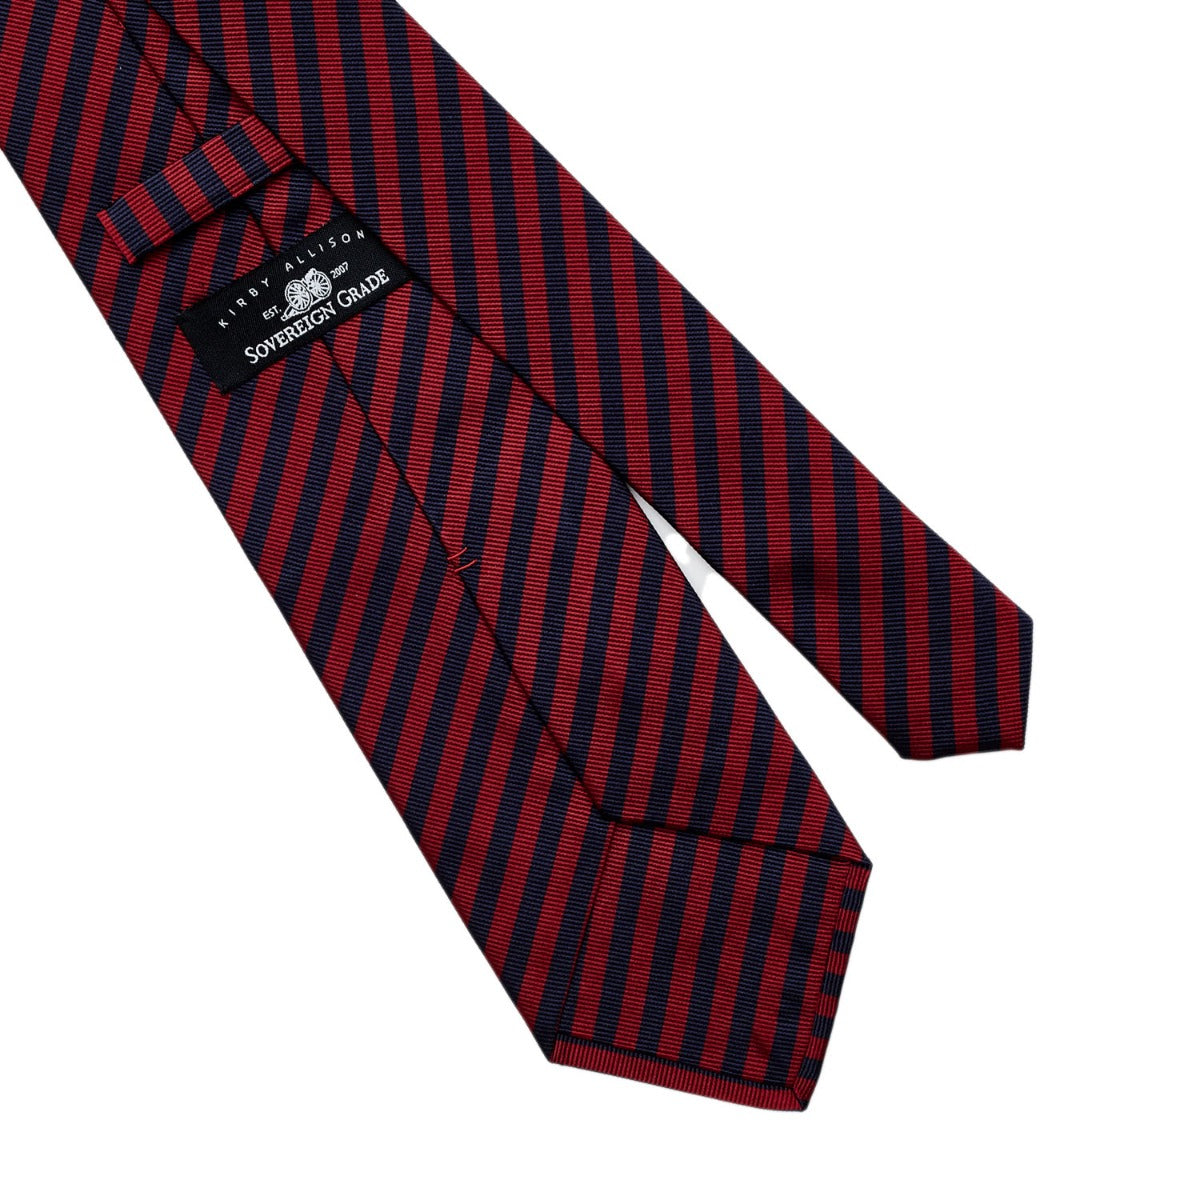 A Sovereign Grade Navy and Red London Stripe Silk Tie of quality craftsmanship on a white background from KirbyAllison.com.